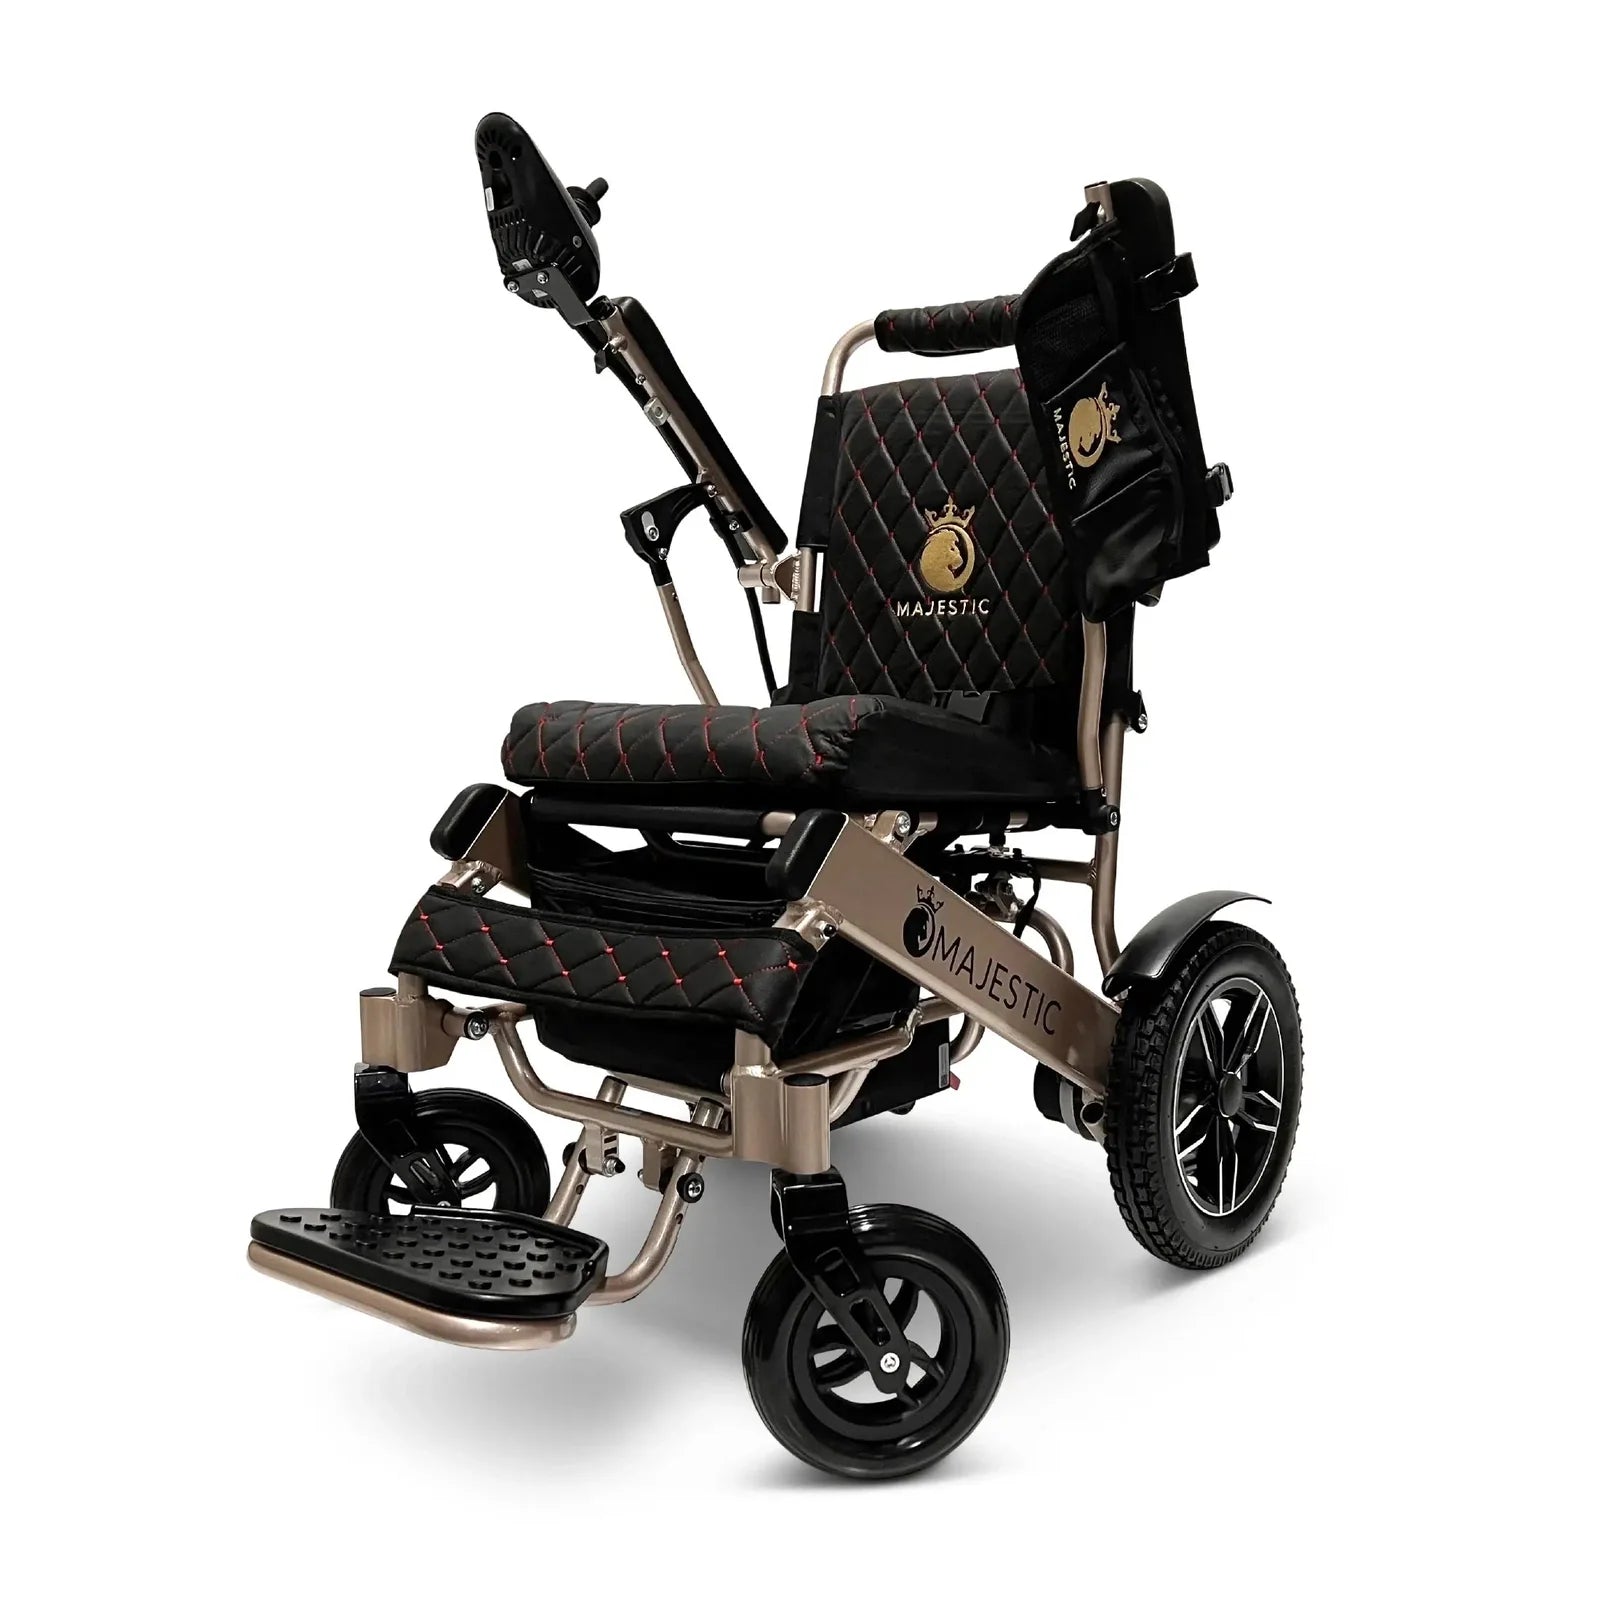 ComfyGO Majestic IQ-8000 Remote Controlled Lightweight Folding Electric Wheelchair Power Wheelchairs ComfyGO Bronze Black 10 Miles & 17.5" Seat Width